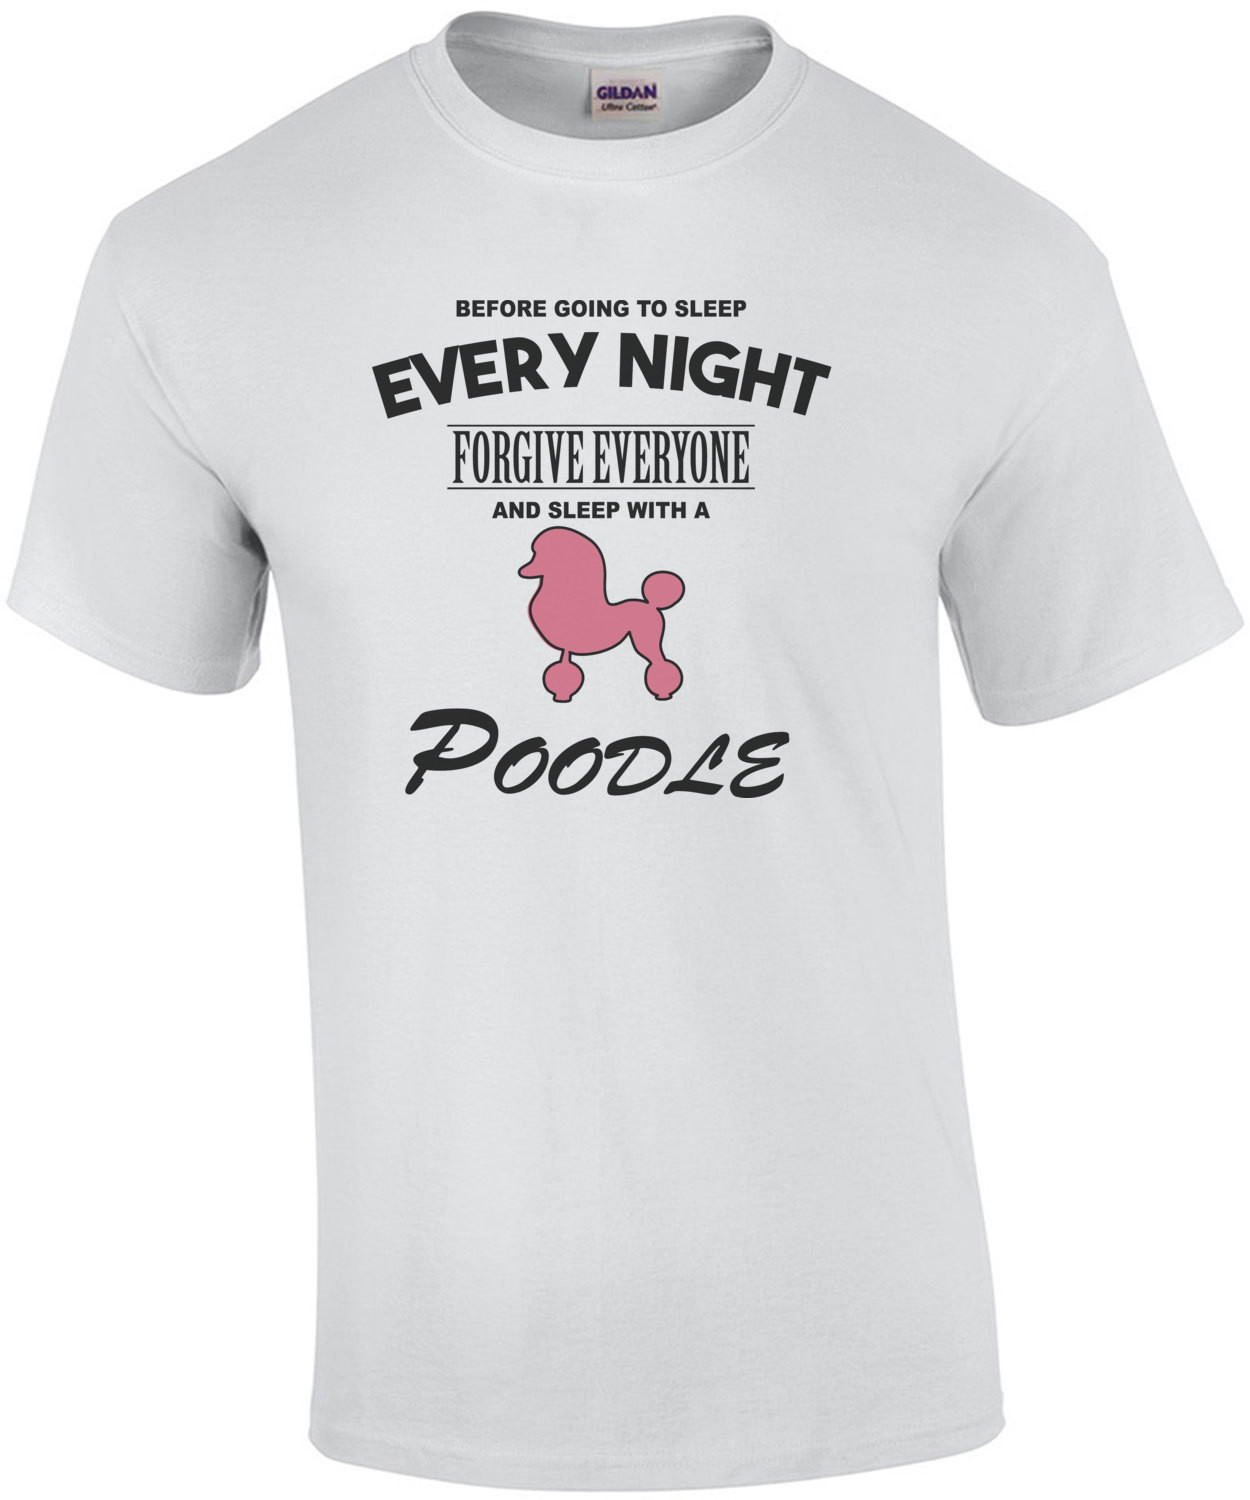 Every night forgive everyone and sleep with a poodle - poodle t-shirt